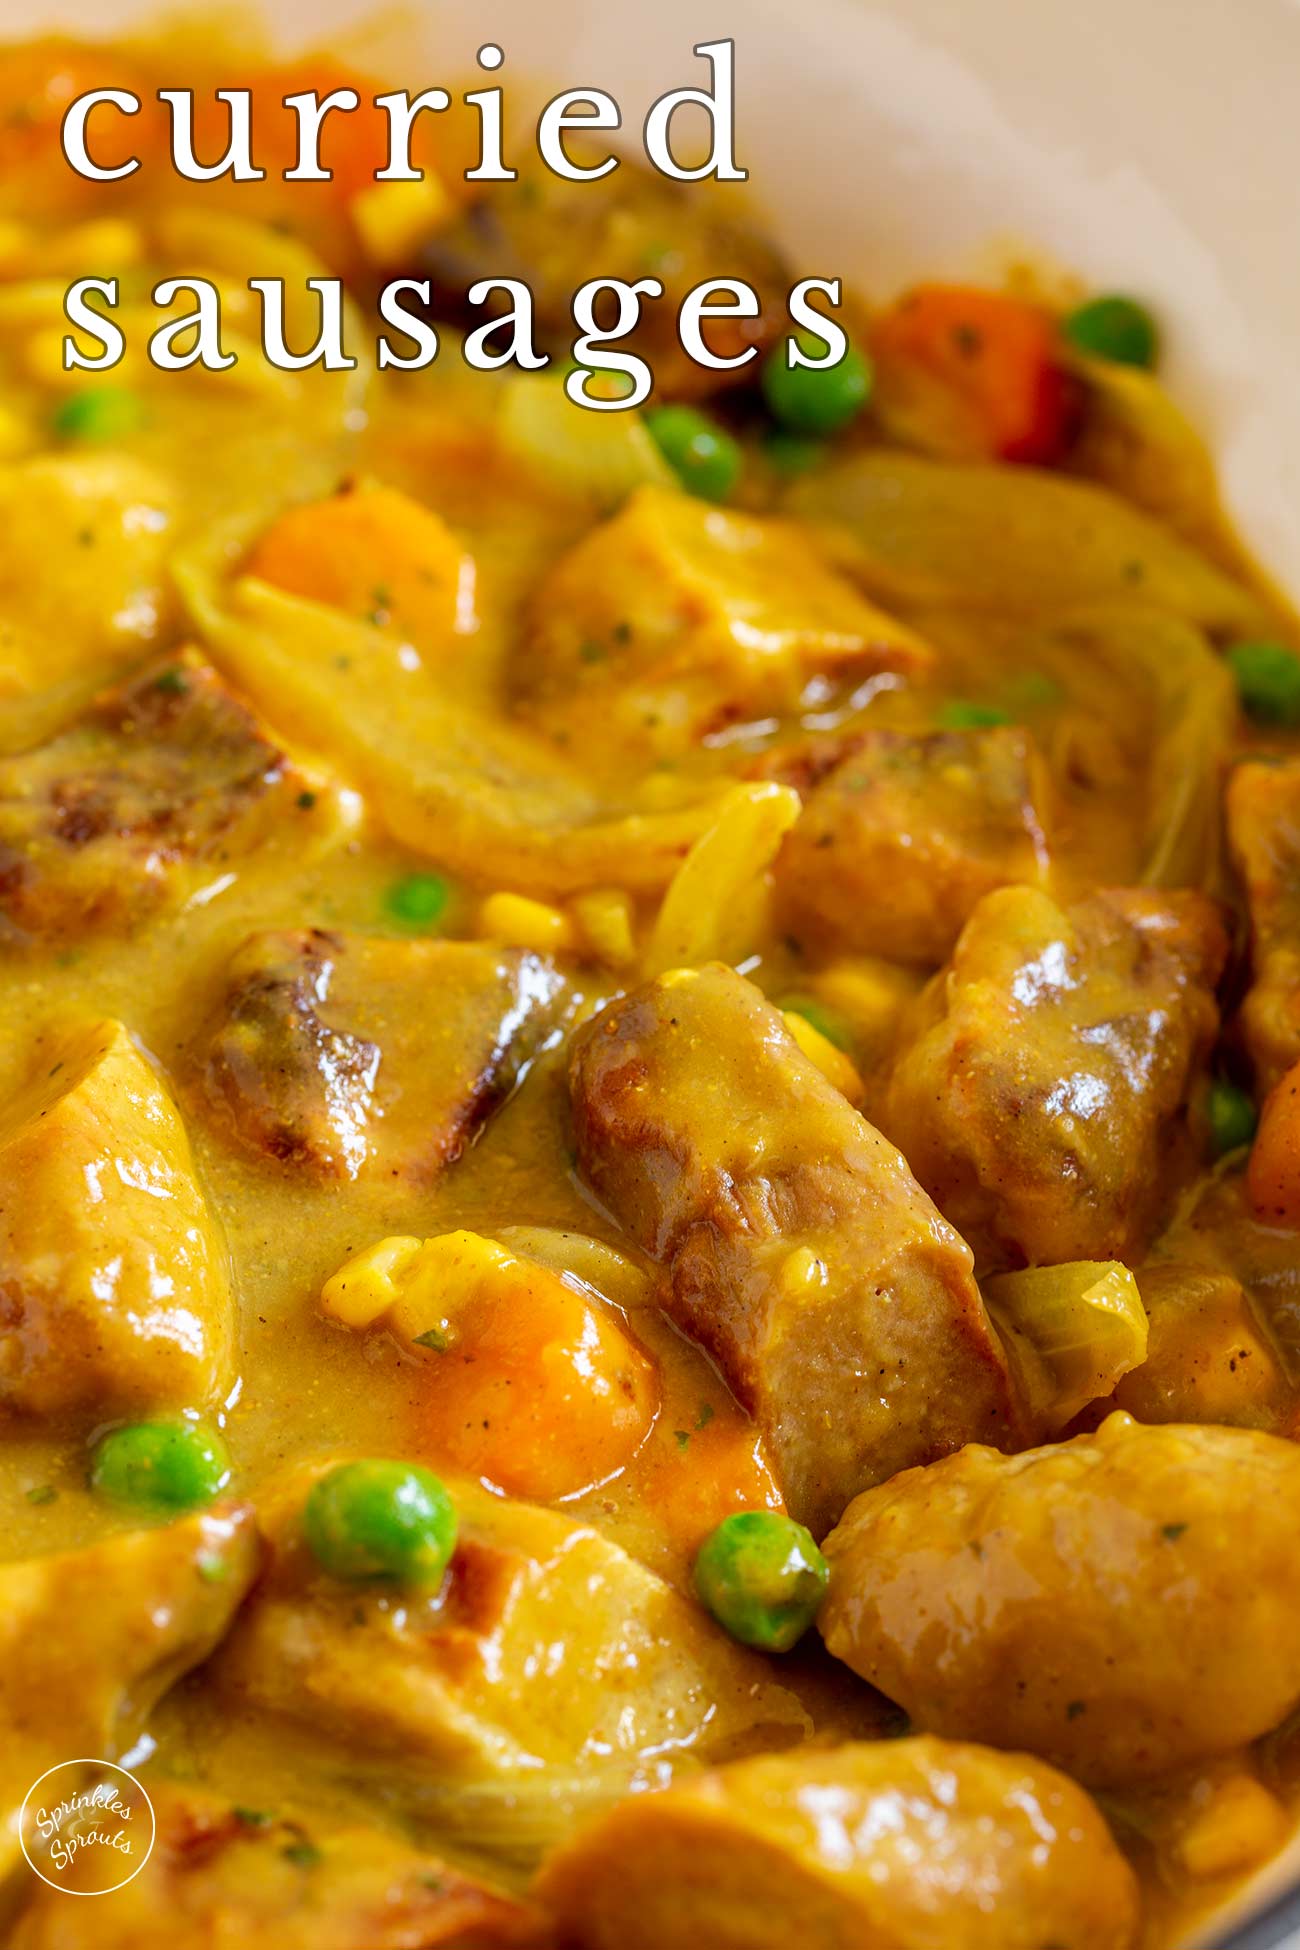 pin image: curried sausages with text overlaid